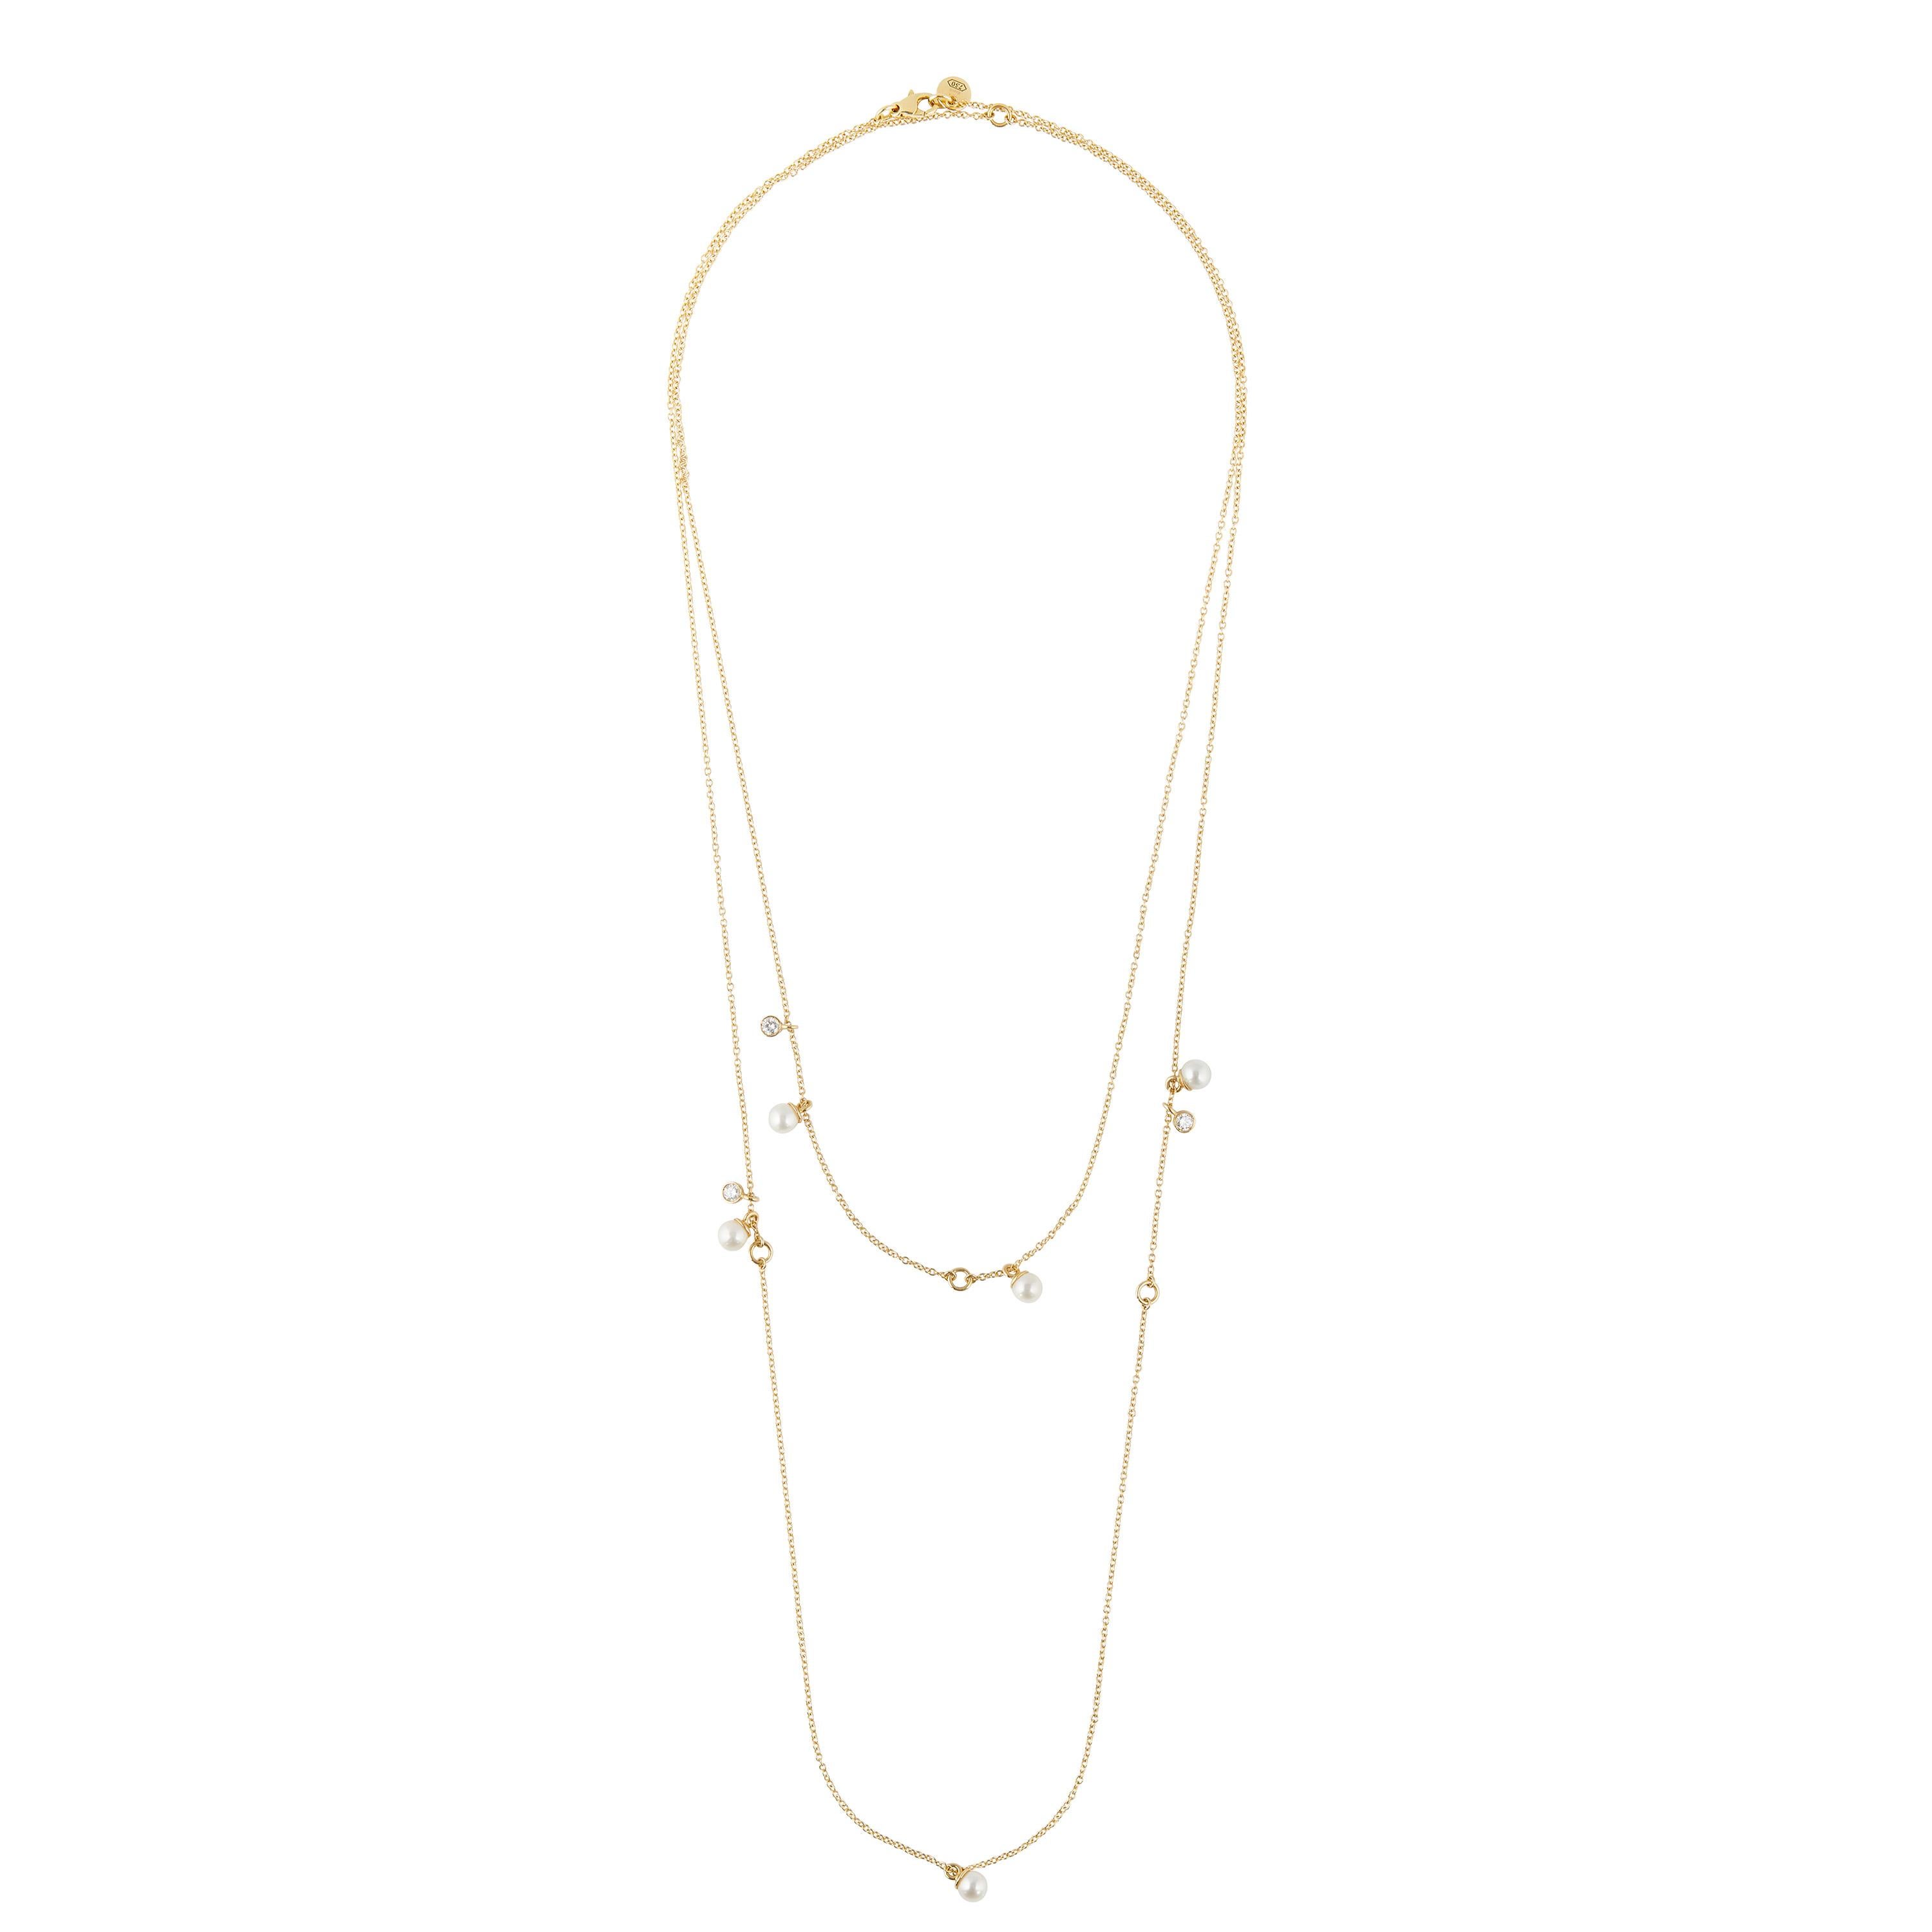 Libre comme l’Or is a long chain in 18kt yellow gold, diamond and pearl.
FREE—LIBRE in French—to wear this versatile jewel according to your mood and fancy. FREE like the diamonds and pearls, decked with tiny gold rings, that effortlessly glide over